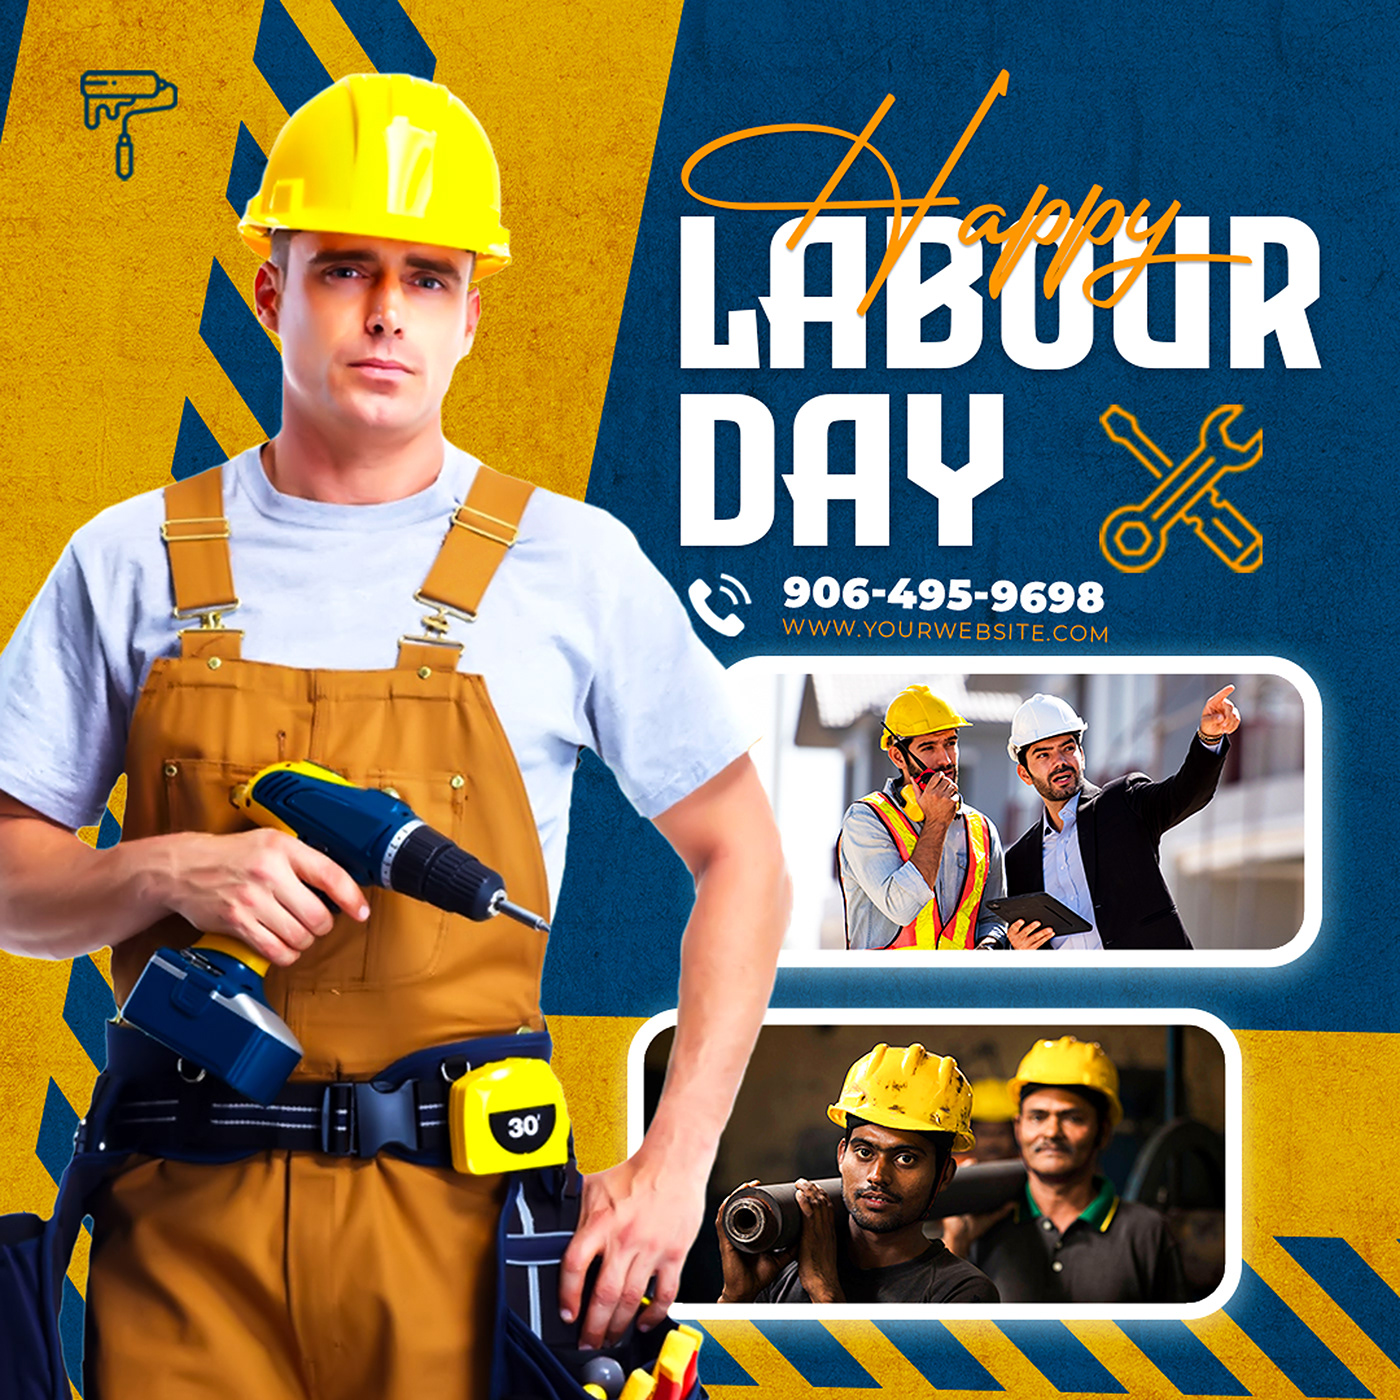 Labour Day Labour day post 1 may Labor Day 1st may Social media post International Labour Day Labour Day Celebration labour day designs labour day t-shirt